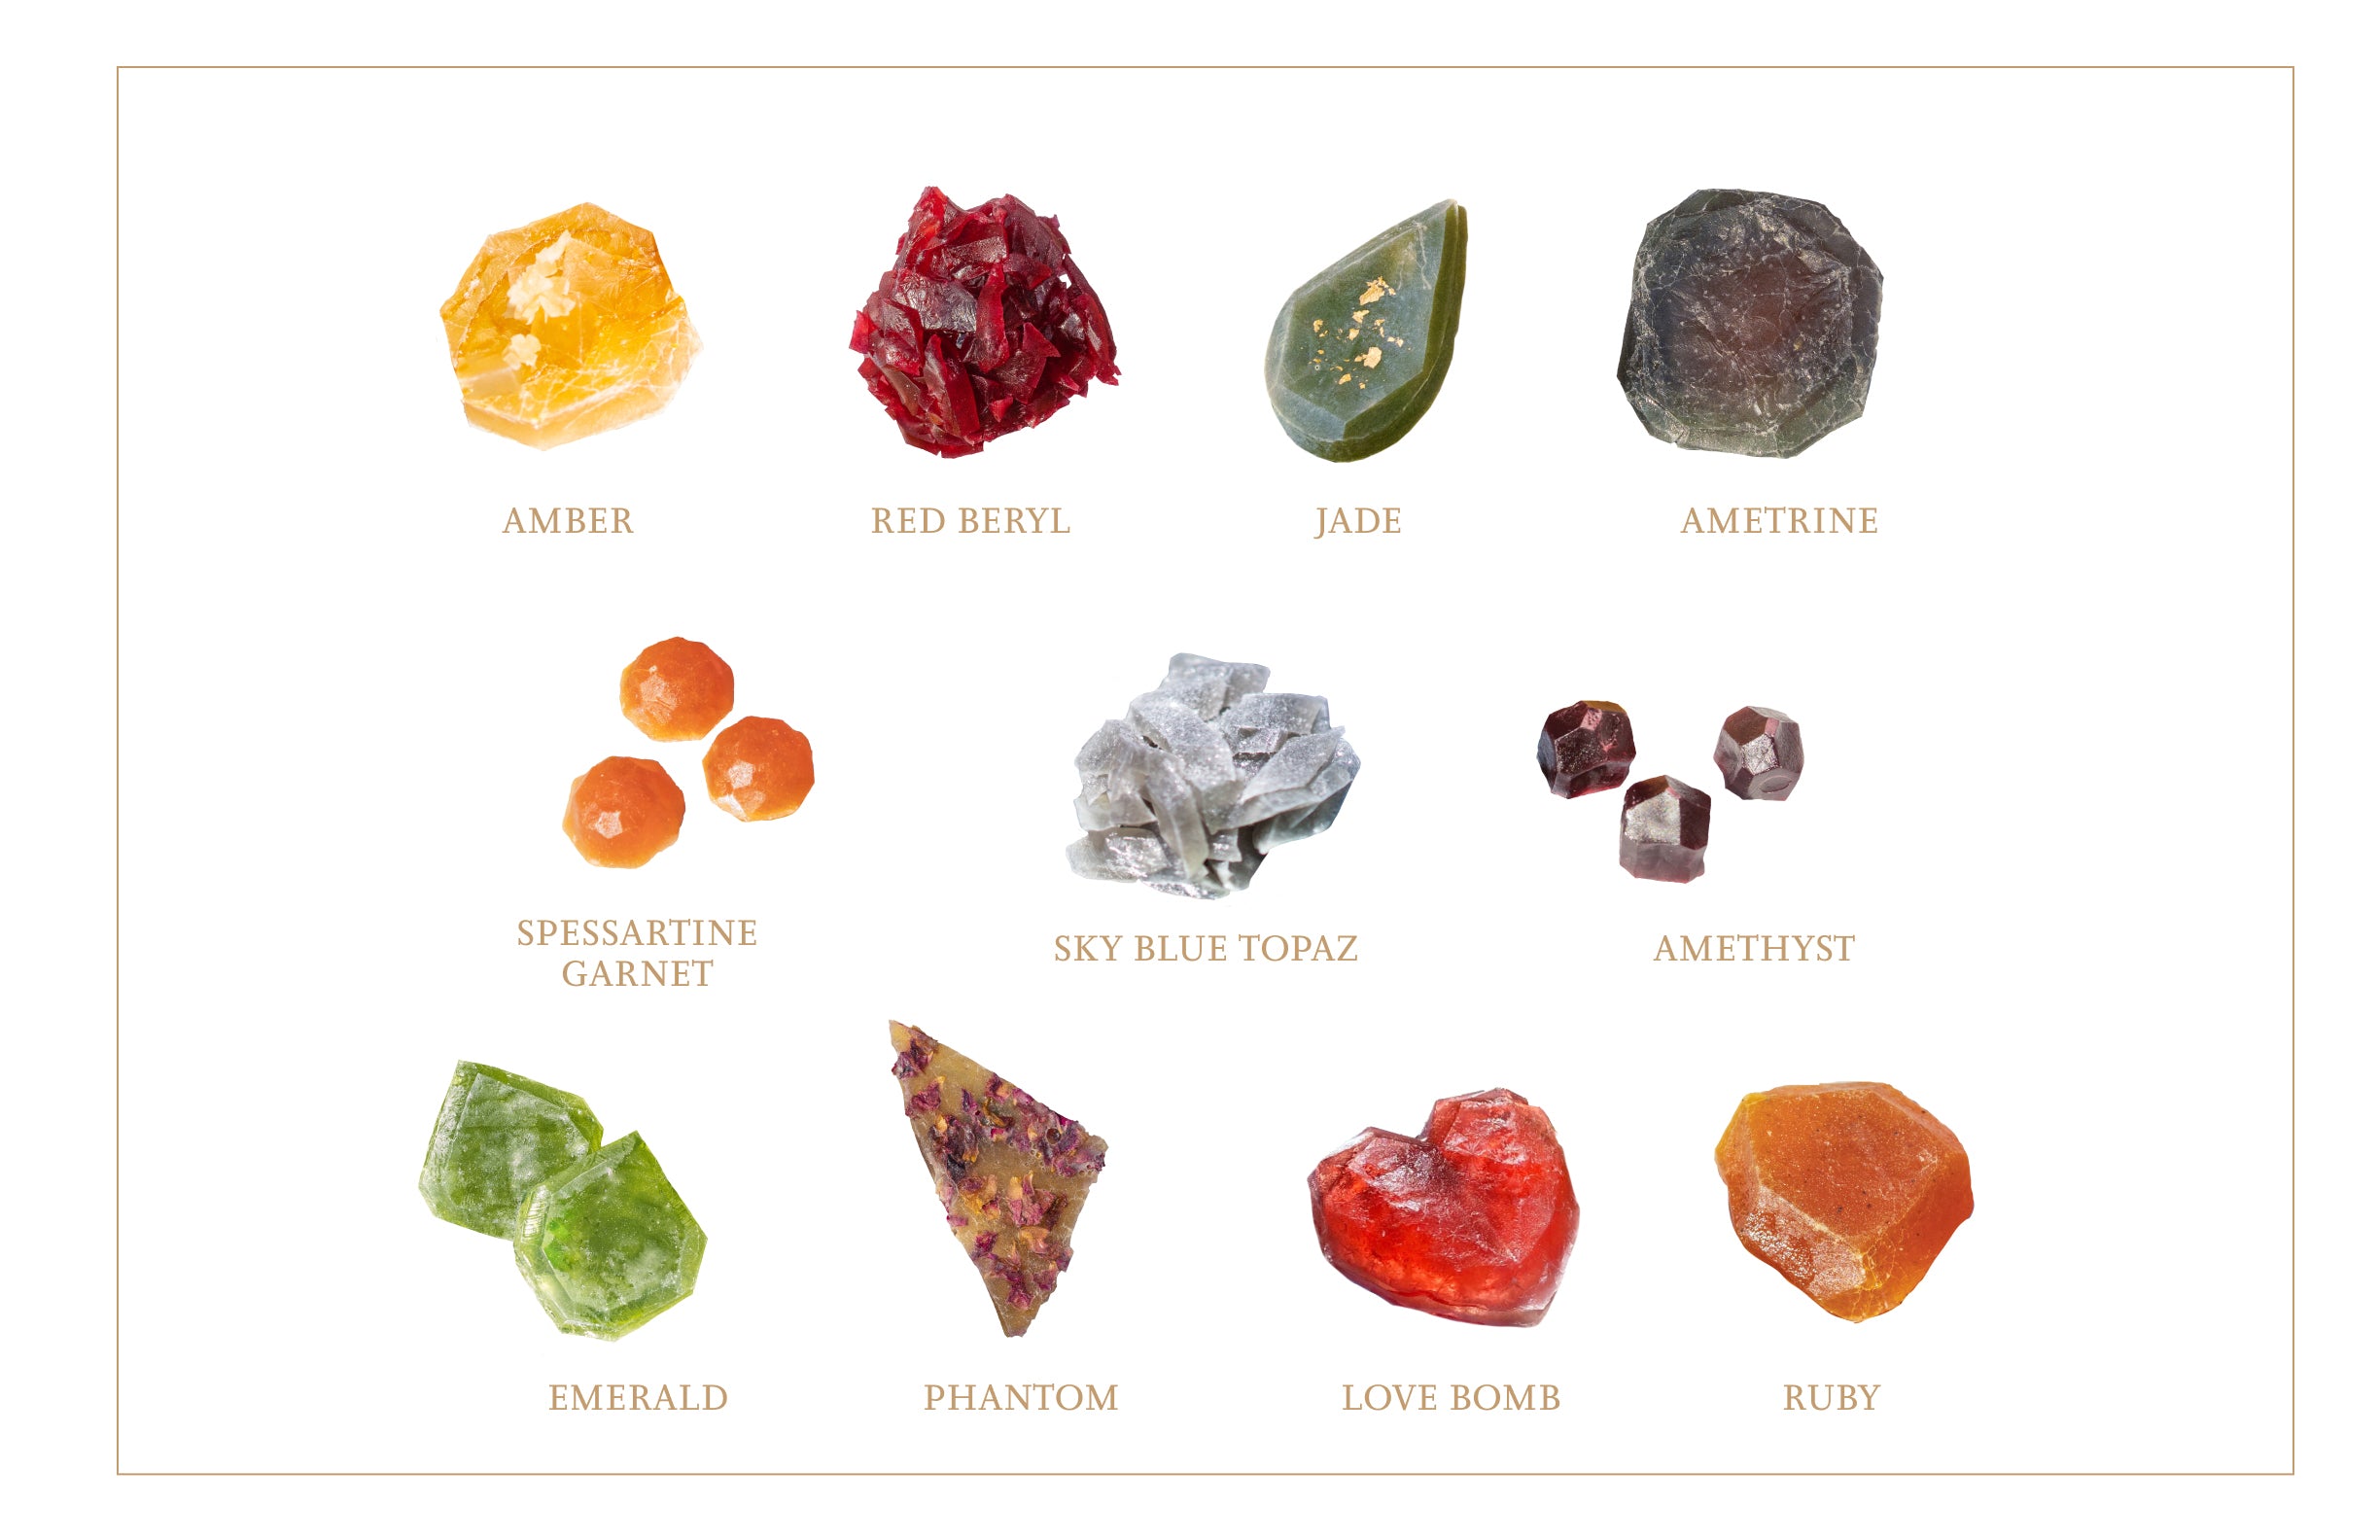 The image features a collection of various raw gemstones, each labeled with its name. The gems displayed are Amber, Red Beryl, Jade, Ametrine, Spessartine Garnet, Sky Blue Topaz, Amethyst, Emerald, Phantom, Love Bomb, and Ruby. They are presented in a grid layout on a white background, each stone's unique color and shape clearly visible.